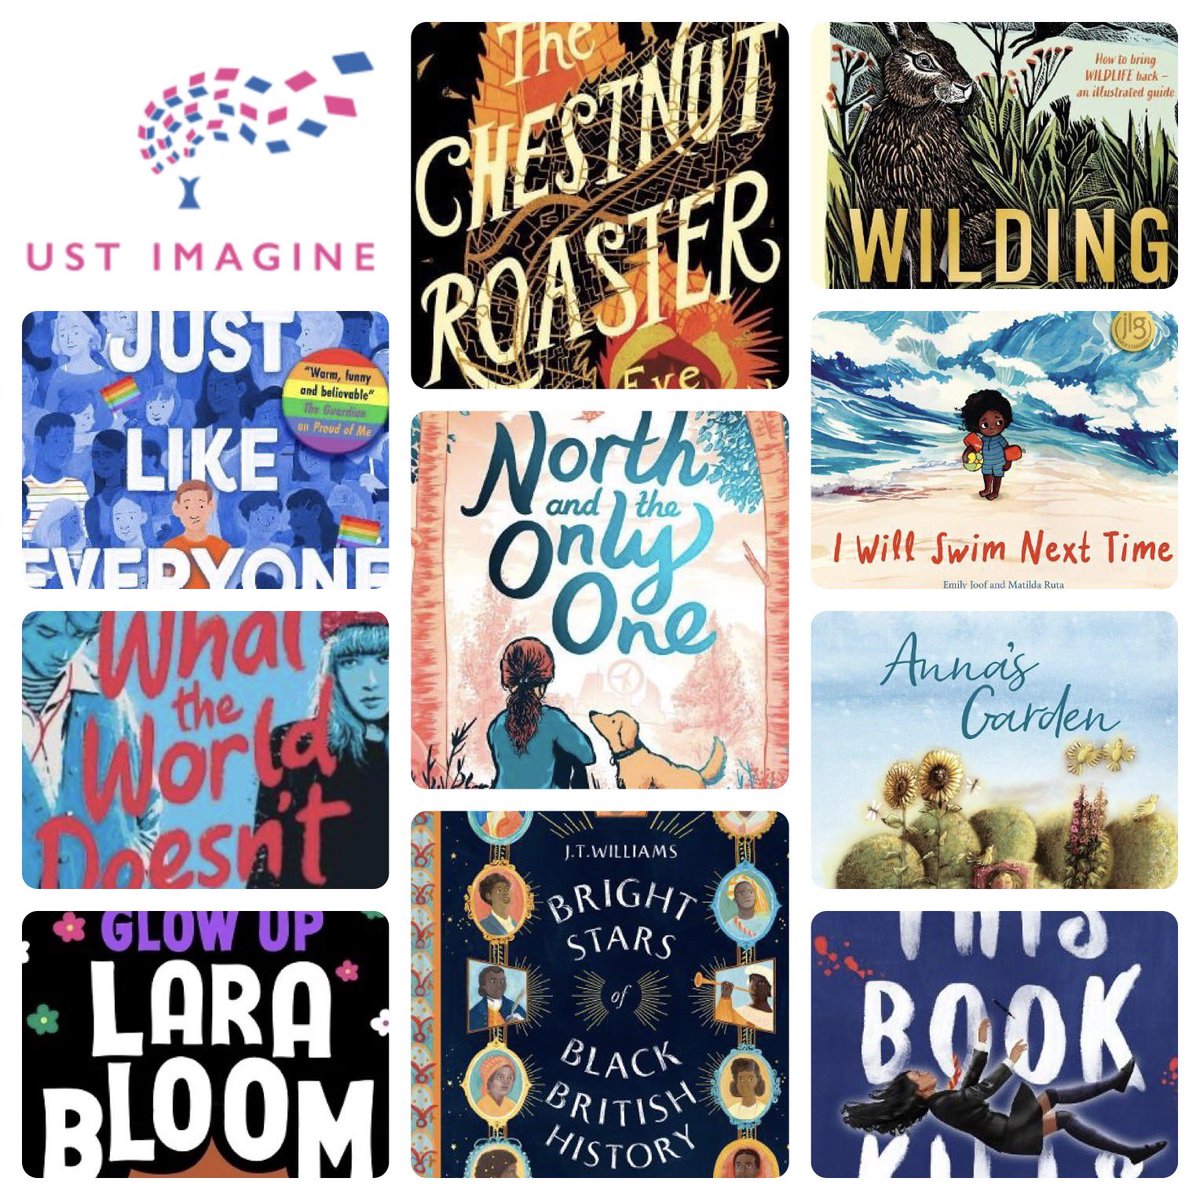 Our weekend round up book reviews for you. Thank you @kashleyenglish @one_to_read @MrWCardiff @MrEFinch @TedGooda @sam_keeley1 @Jo_Bowers justimagine.co.uk/childrens-book…